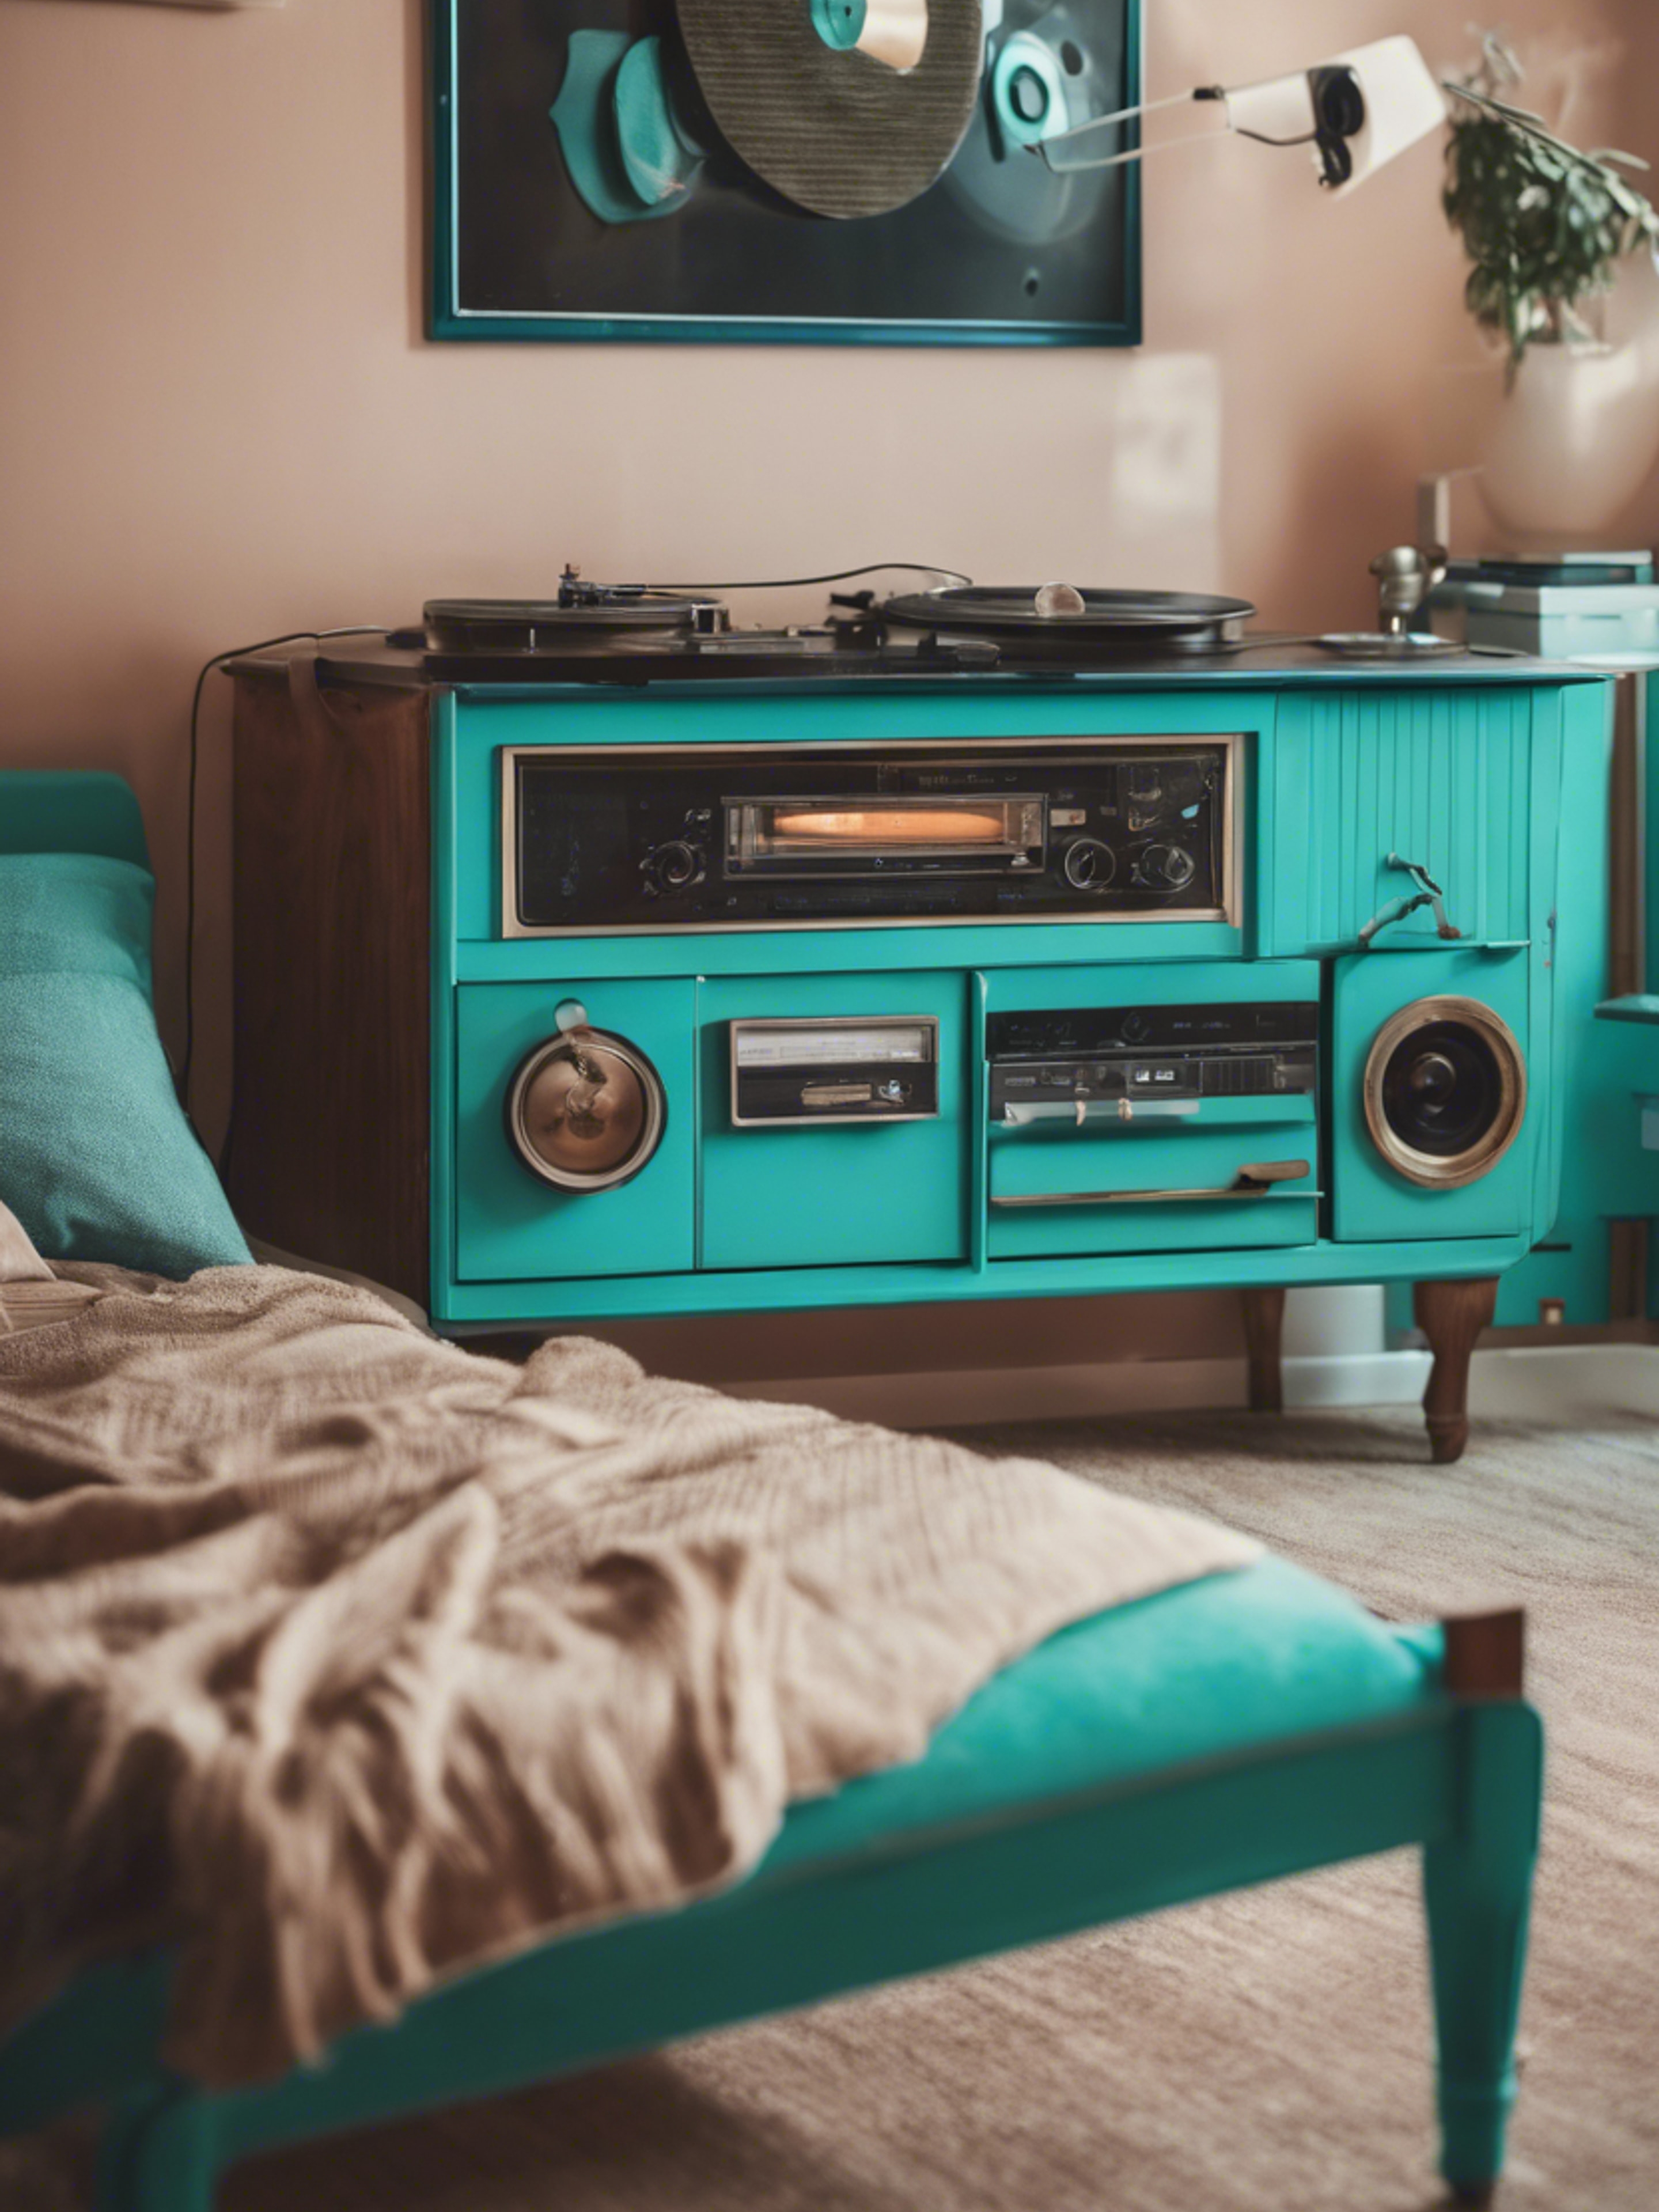 A turquoise retro bedroom with vintage furniture and record players ផ្ទាំង​រូបភាព[9d05420ae9754c17b49a]